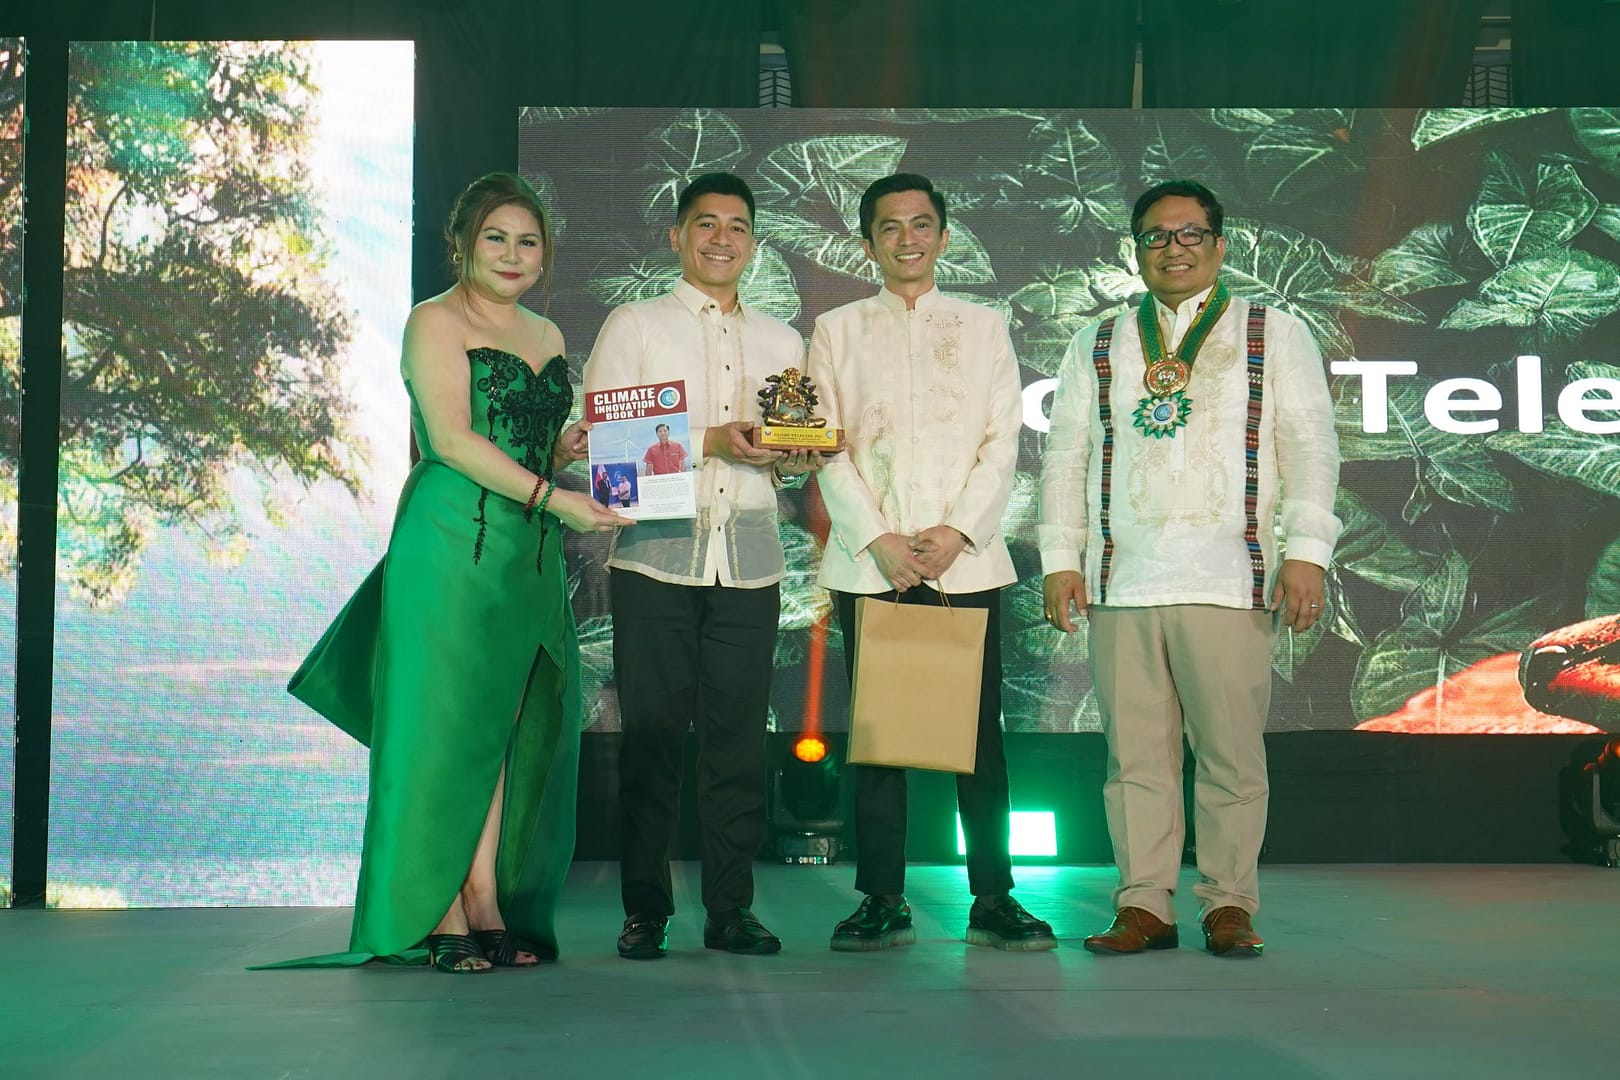 [L-R] Marichelle "Mache" Torres-Ackerman, Ambassador, Chairperson of Climate Change Commission Week and Chairperson/Founder of Green Gala Awards; Pete Fernandez, Climate Action Lead, Sustainability and Social Responsibility, Globe; Cloyd Masaudling, Strategy Project Management Officer, Globe; and Albert Dela Cruz, Climate Change Commissioner.